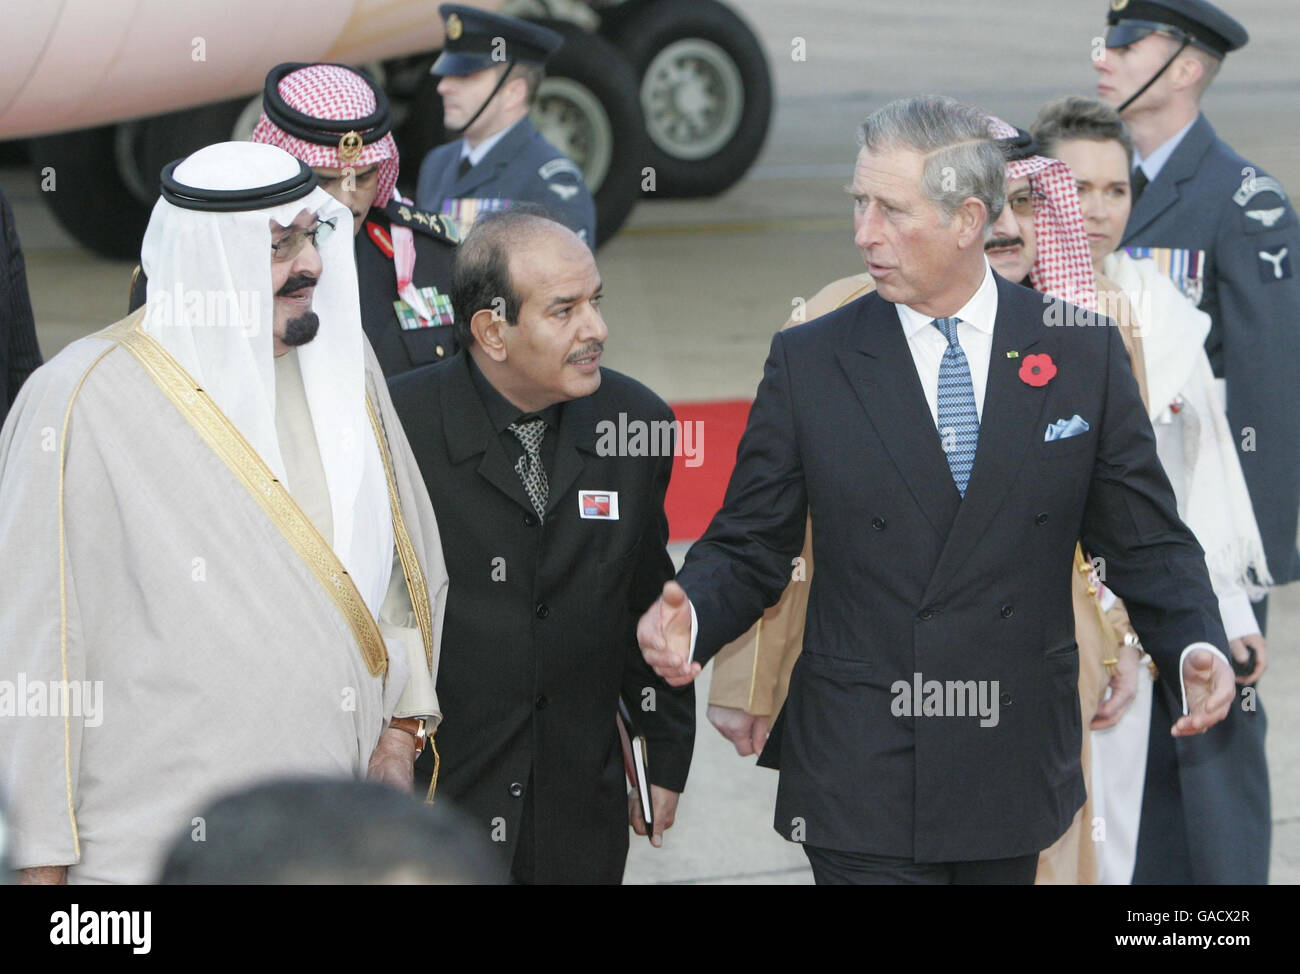 King Abdullah of Saudi Arabia (left) is greeted by The Prince of Wales at Heathrow airport. Stock Photo